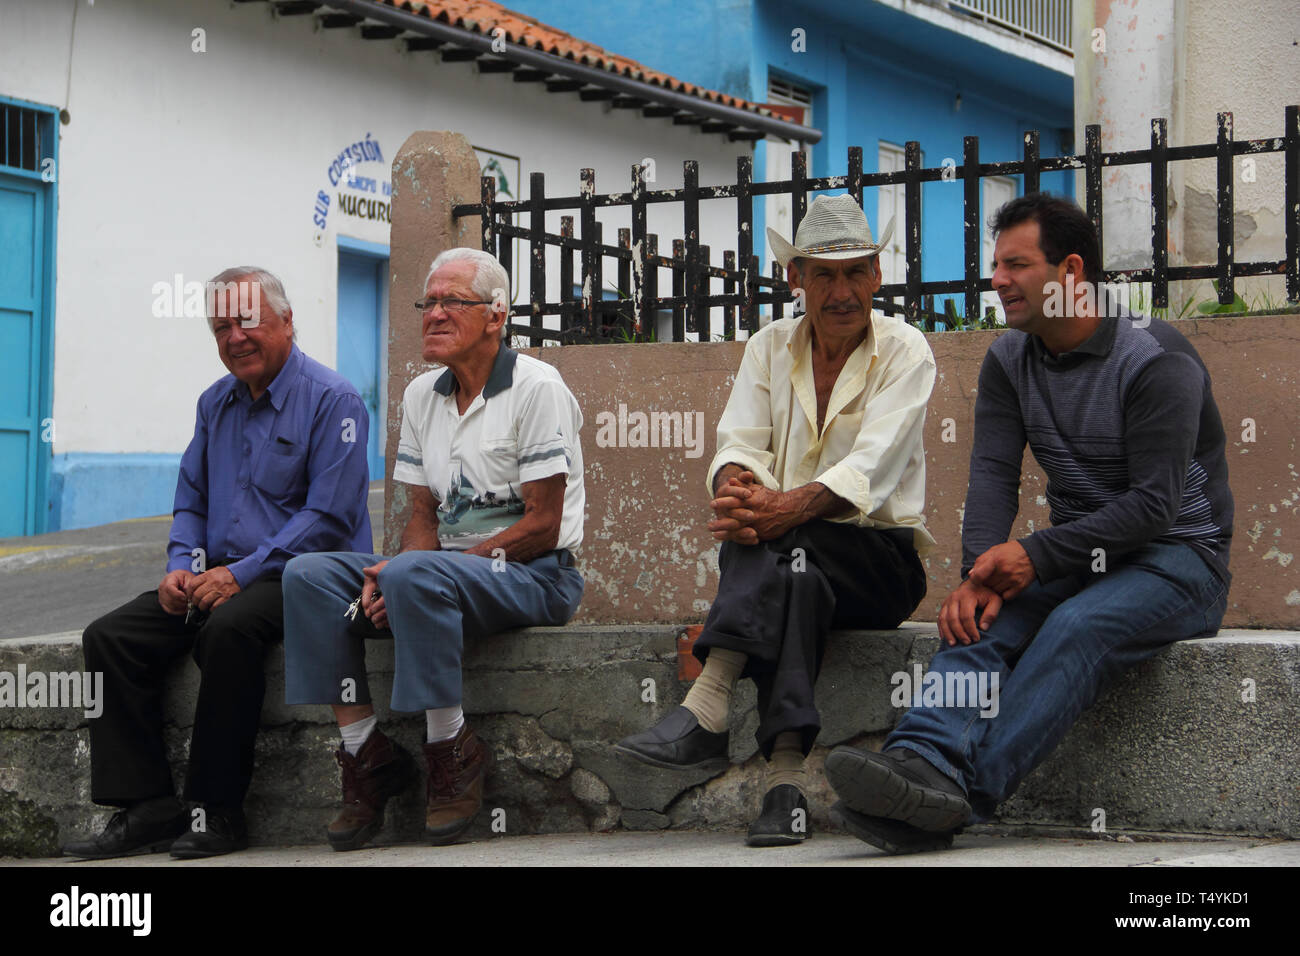 Merida, Venezuela - April 7, 2017: Local men in casual wear sits and discussing with each other in outdoors of town area. Stock Photo